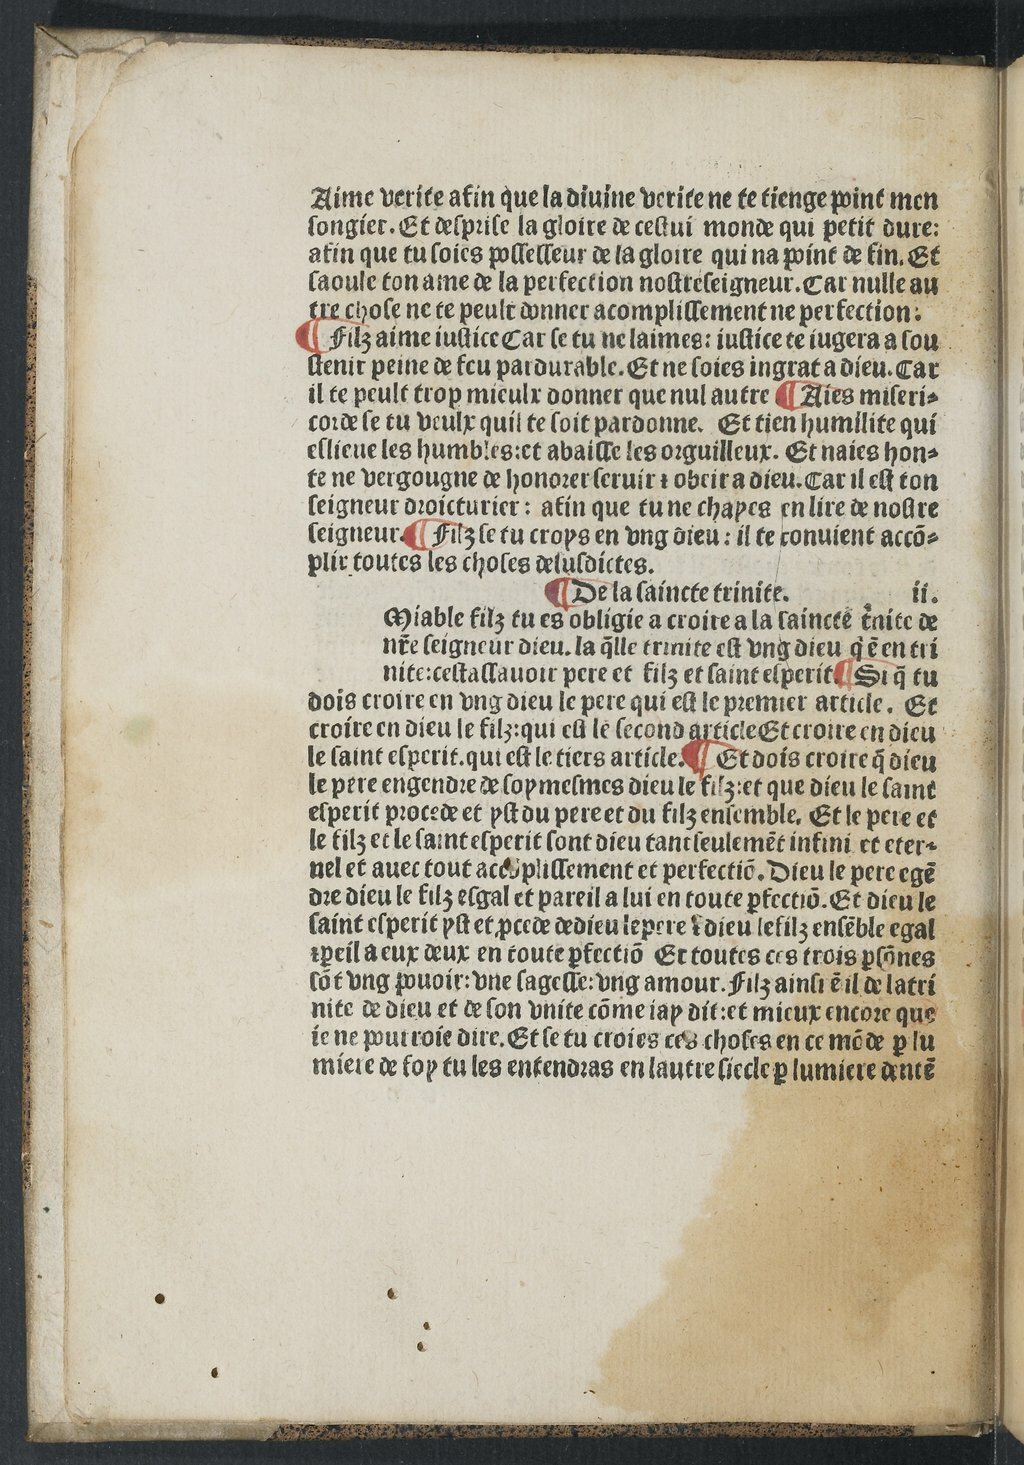 1482 [Antoine Caillaut] Trésor des humains BnF_Page_008.jpg